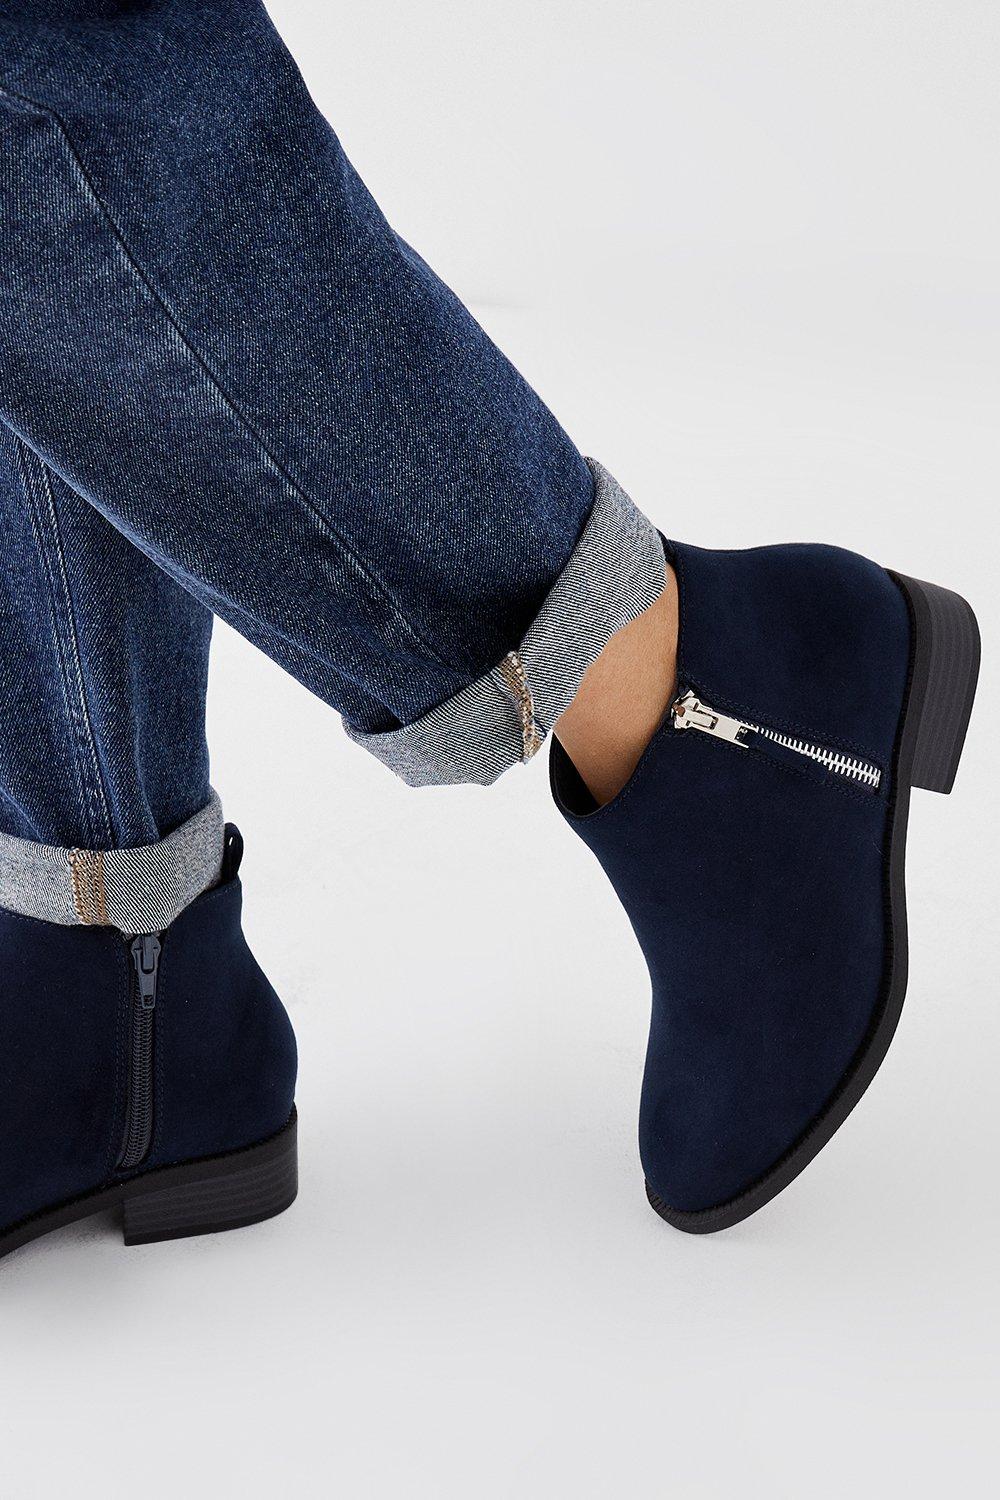 Womens Madrid Zip Up Ankle Boots